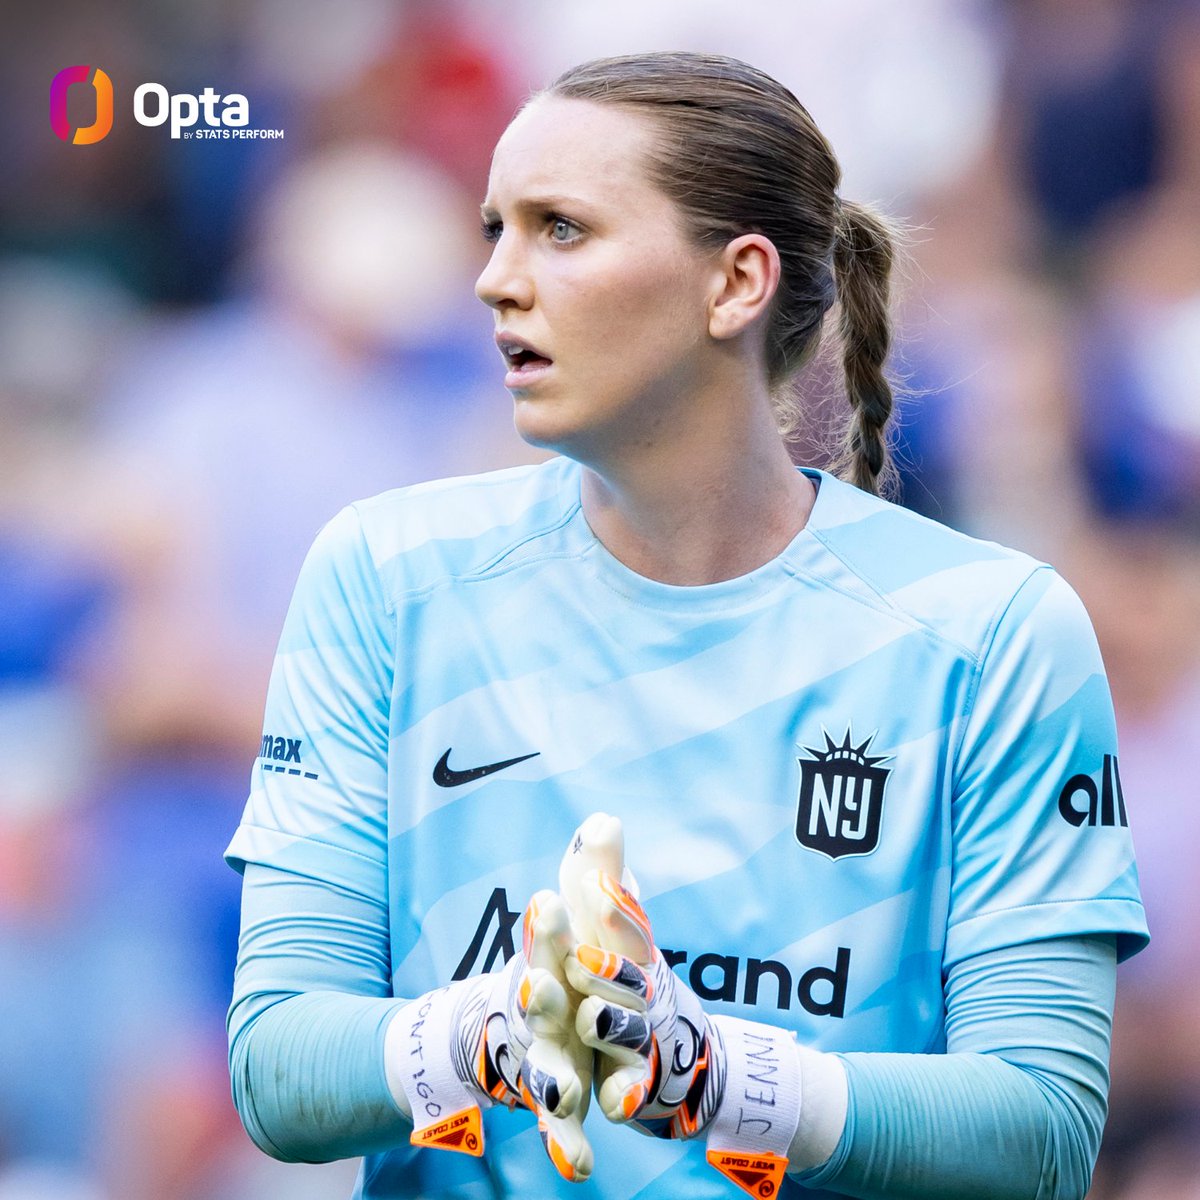 2 - @GothamFC's Mandy Haught joins Aubrey Kingsbury (Was vs NC - 2021) as the only goalkeepers to keep a clean sheet over 120 minutes in an @NWSL Playoff match. Impenetrable.